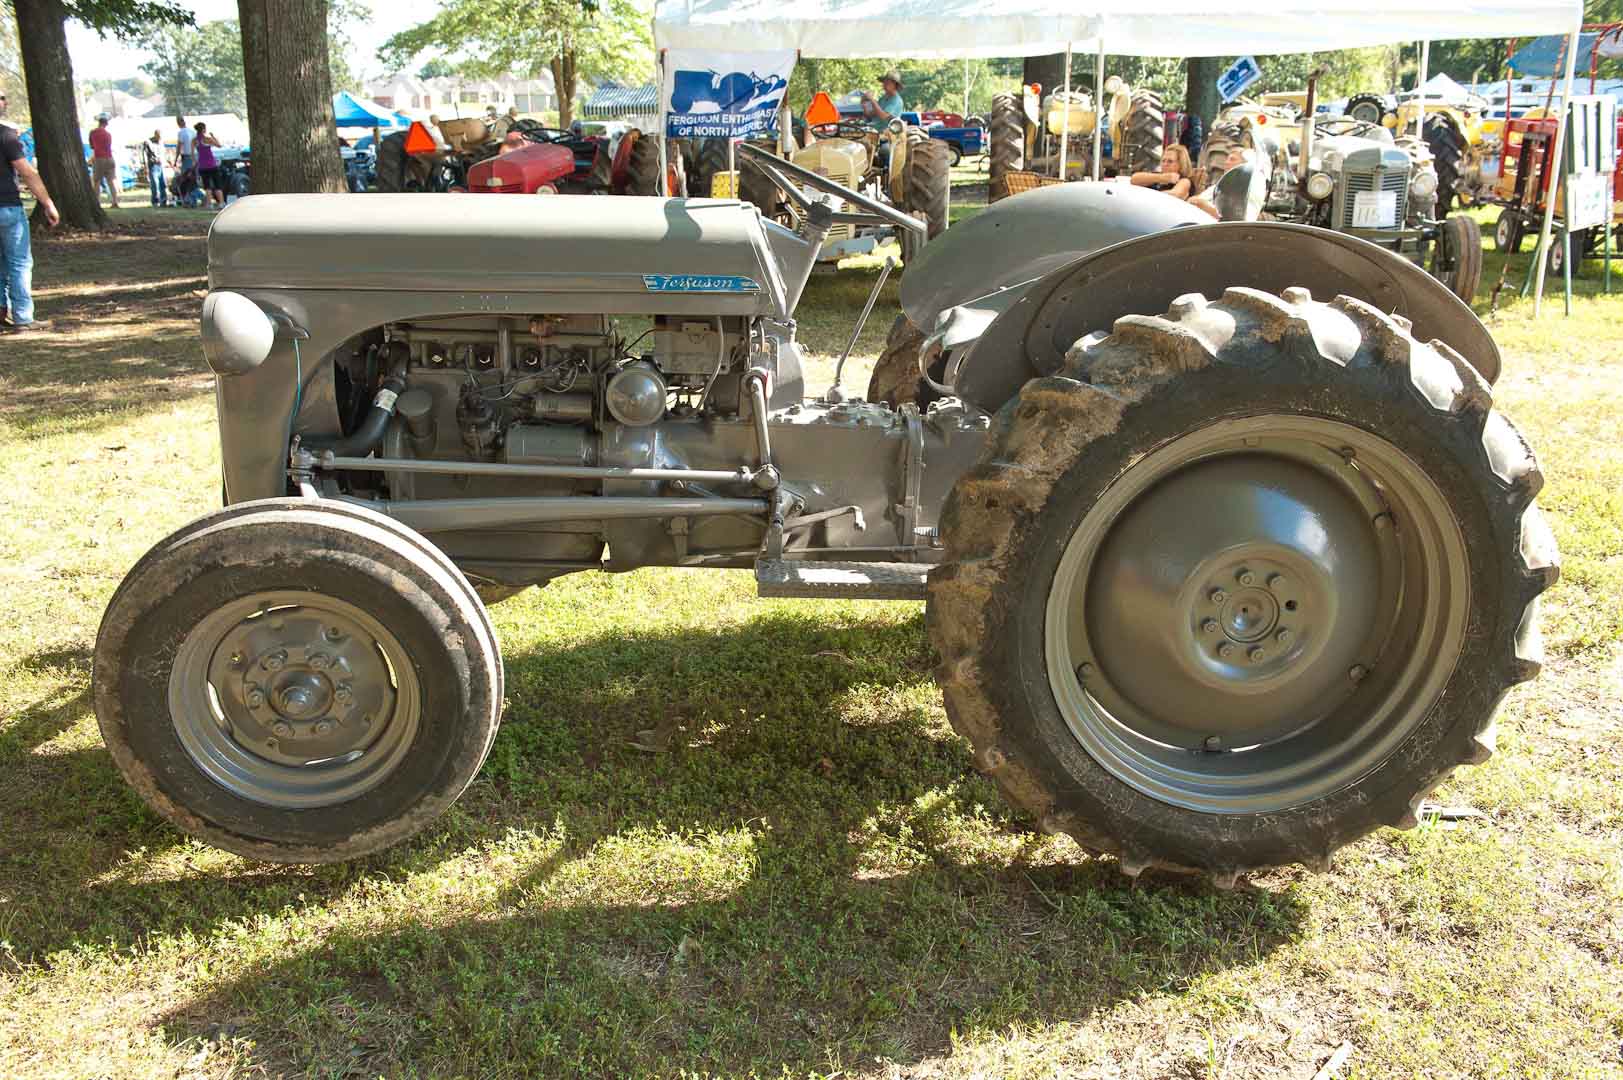 1948 TE-20 Arnold and Vickie Nielson of Quapaw, OK with all 4 wheels off the ground with the use of a Ferguson tractor jack.